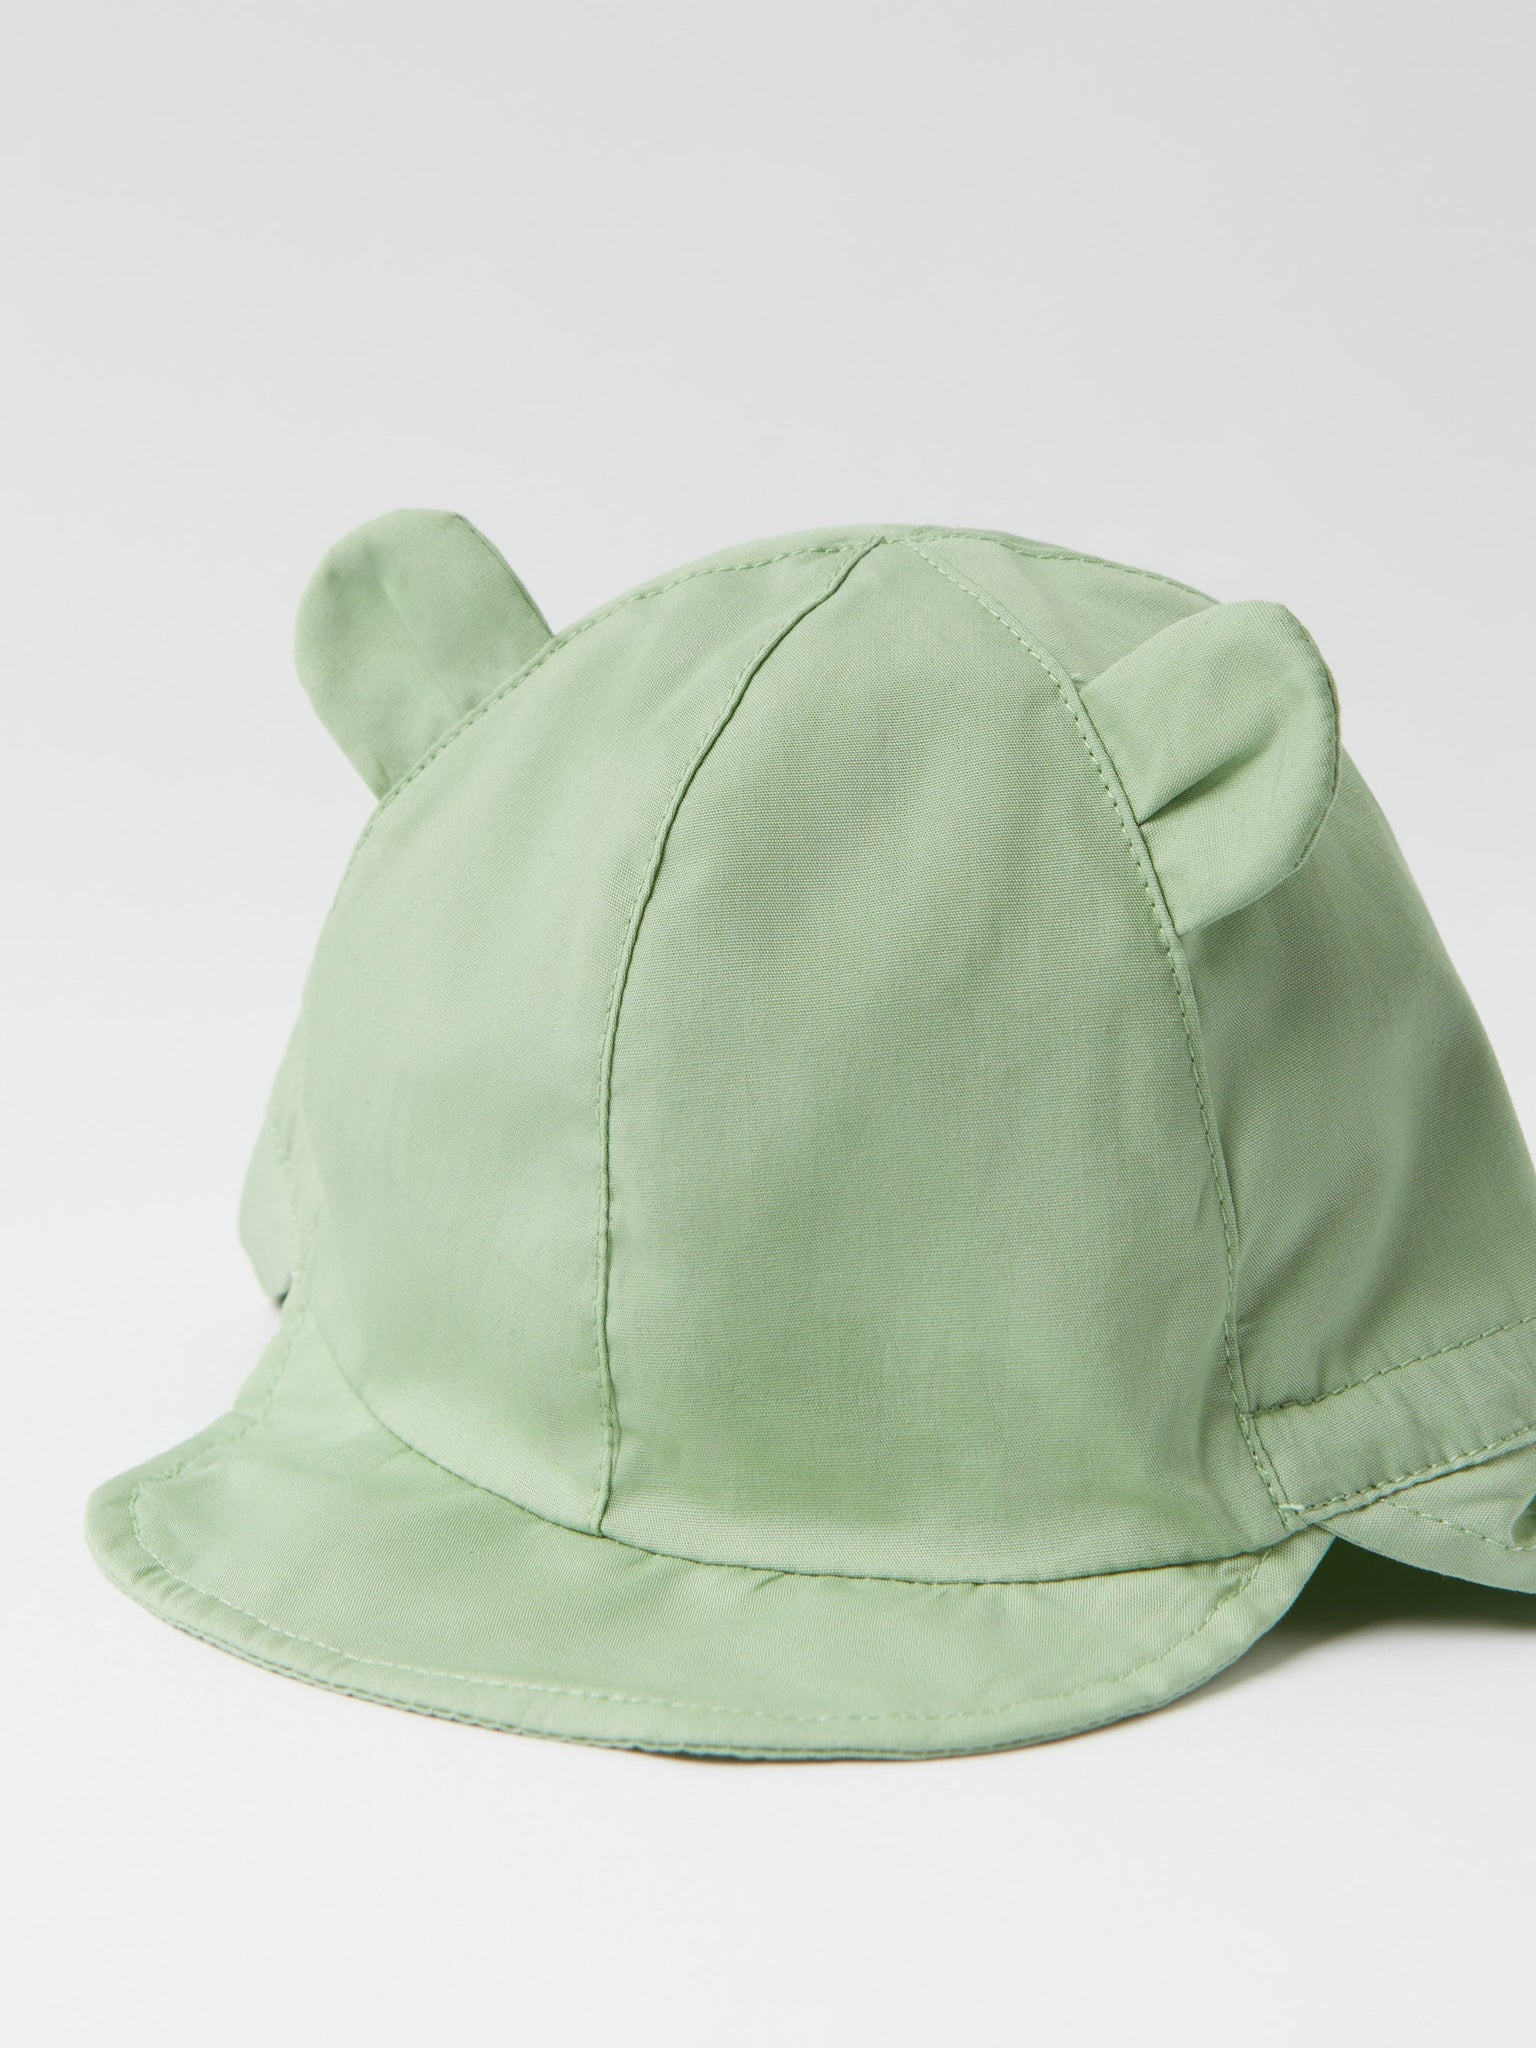 Kids UV Legionaire Hat from the Polarn O. Pyret kidswear collection. Quality kids clothing made to last.